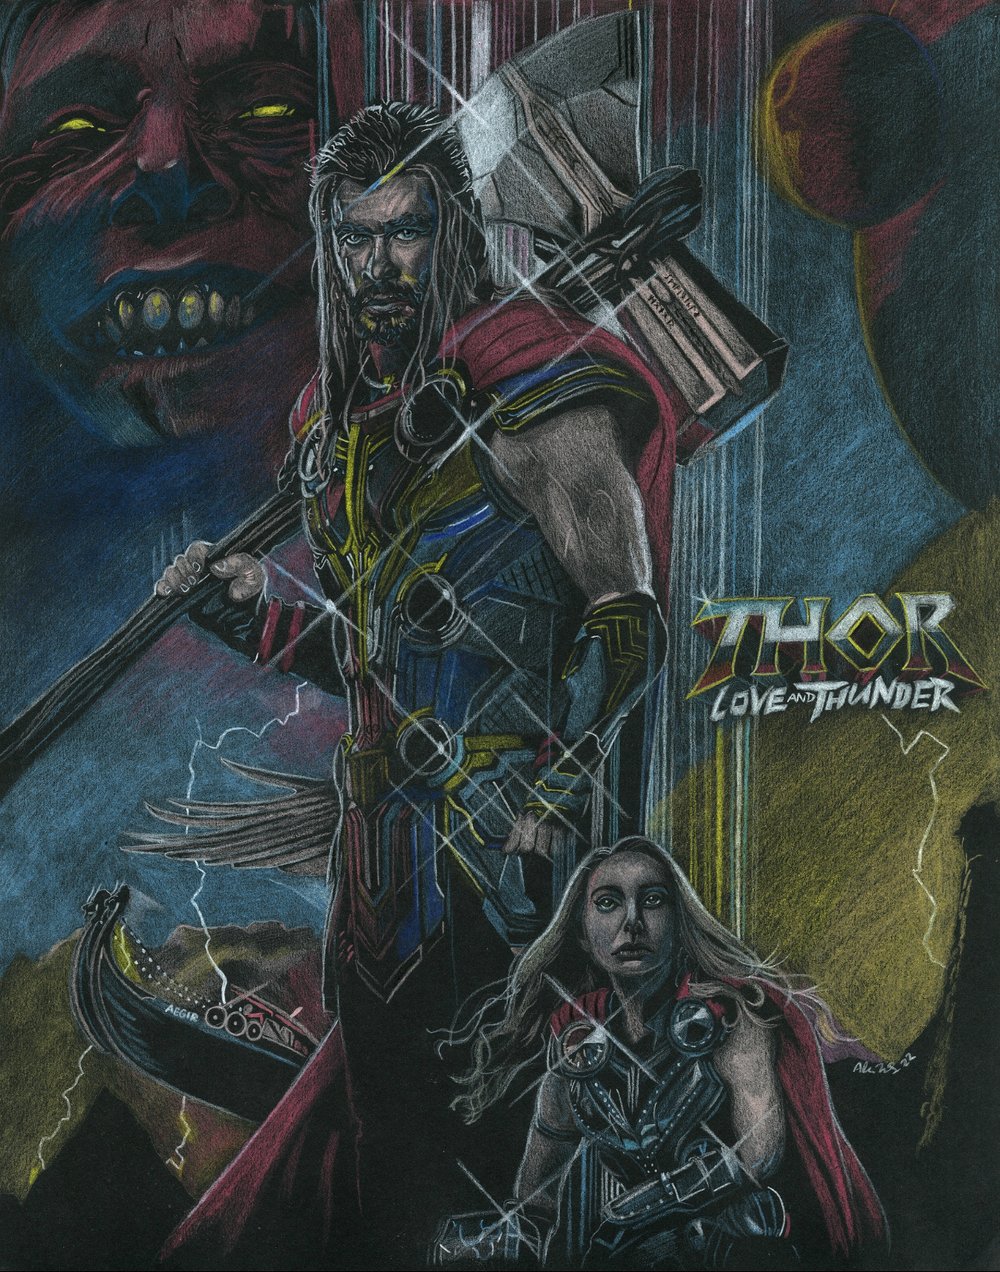 Image of “More like a promise than a curse.” THOR LOVE AND THUNDER Art Print